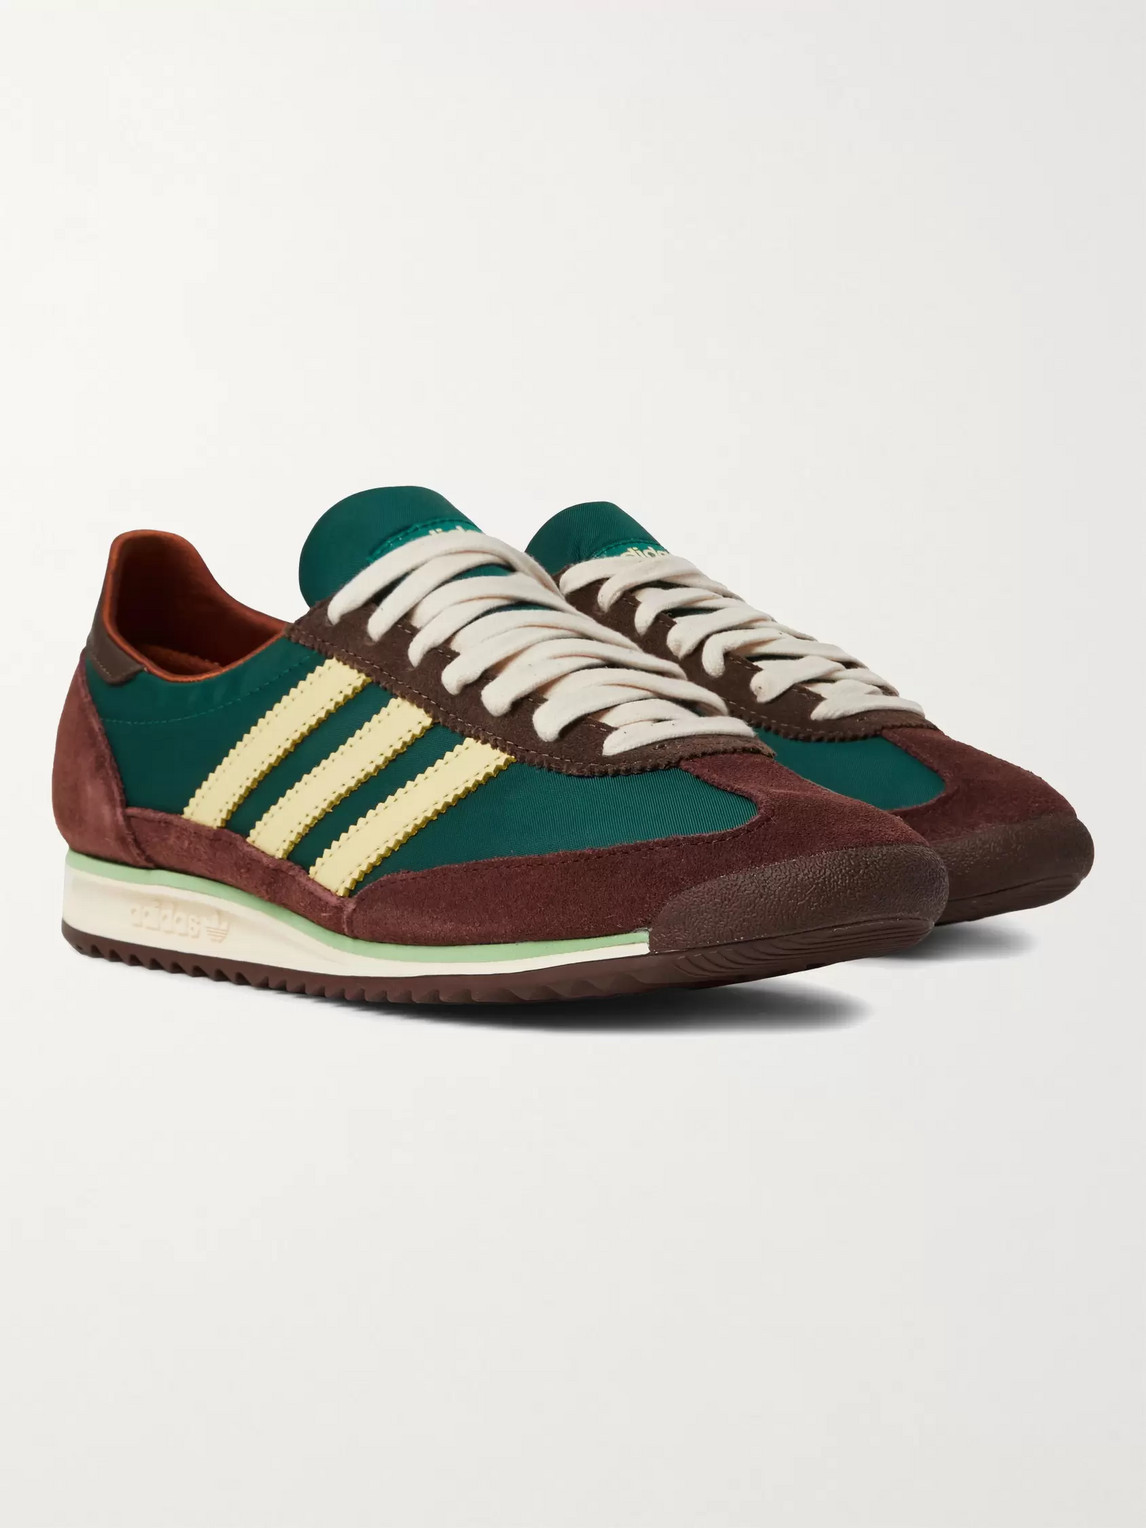 Adidas Consortium Wales Bonner Sl72 Shell, Leather And Suede Sneakers In Green